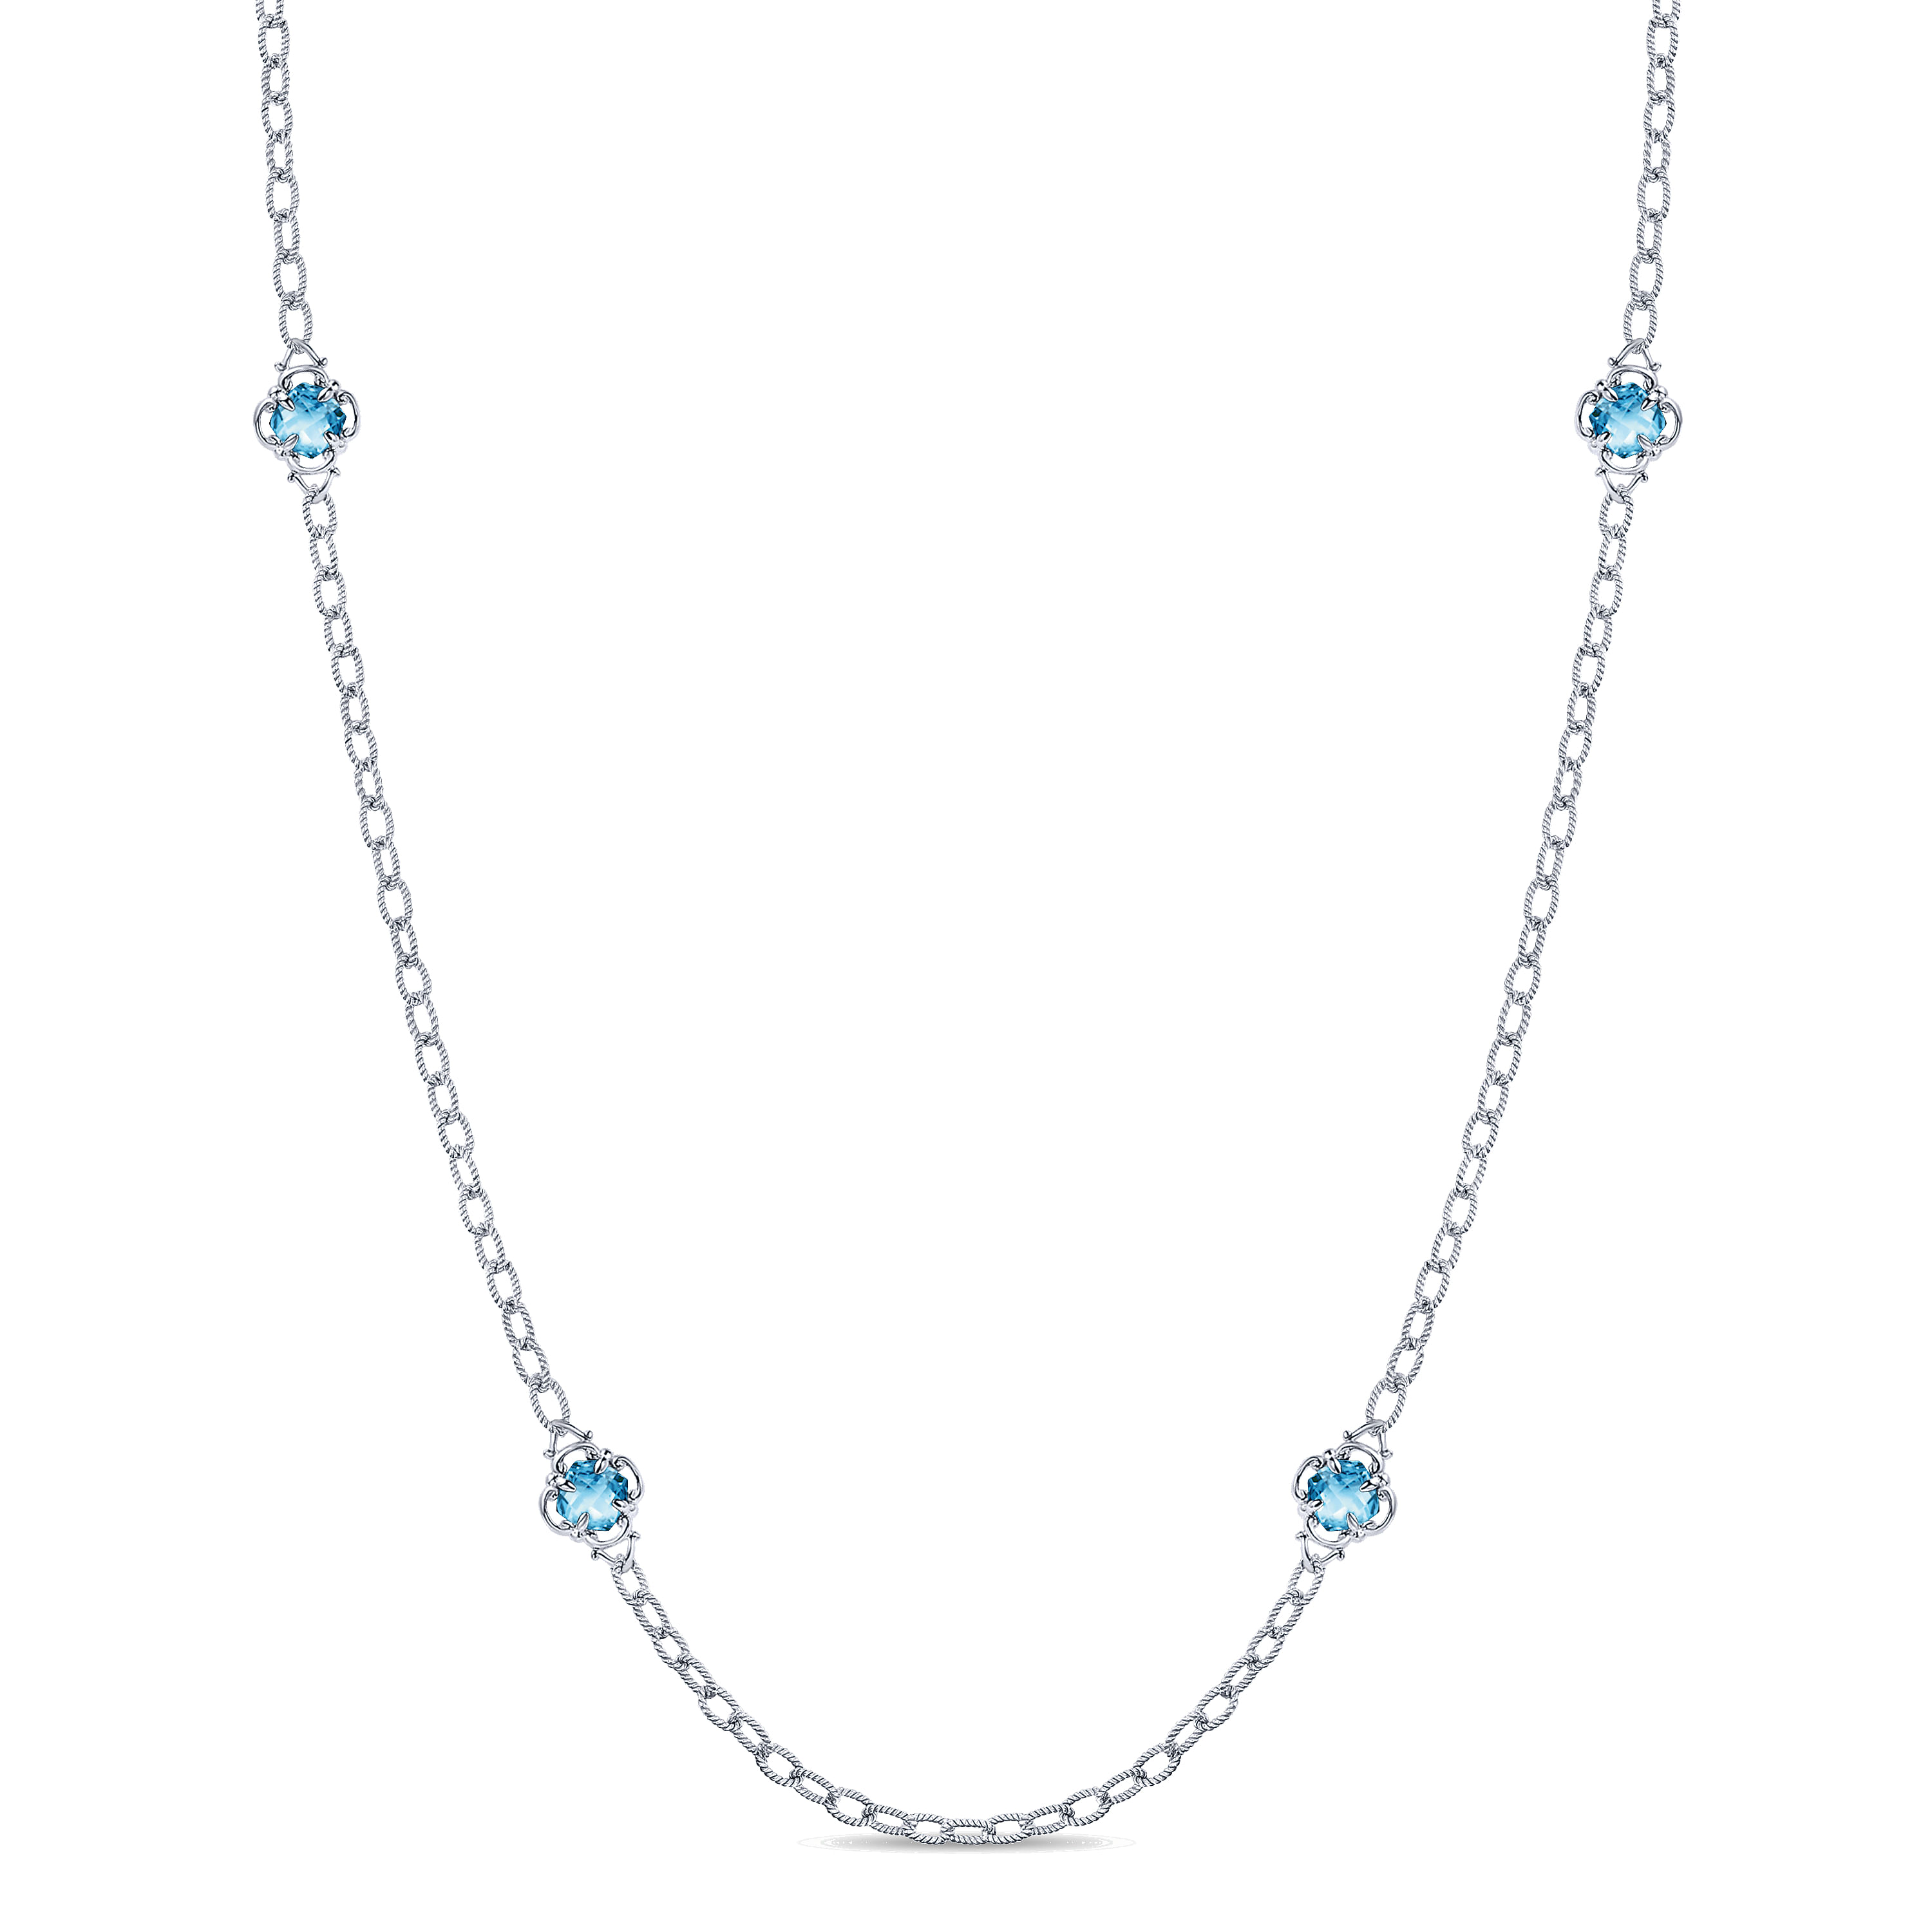 32 inch 925 Sterling Silver Cushion Cut Swiss Blue Topaz Clover Station Necklace